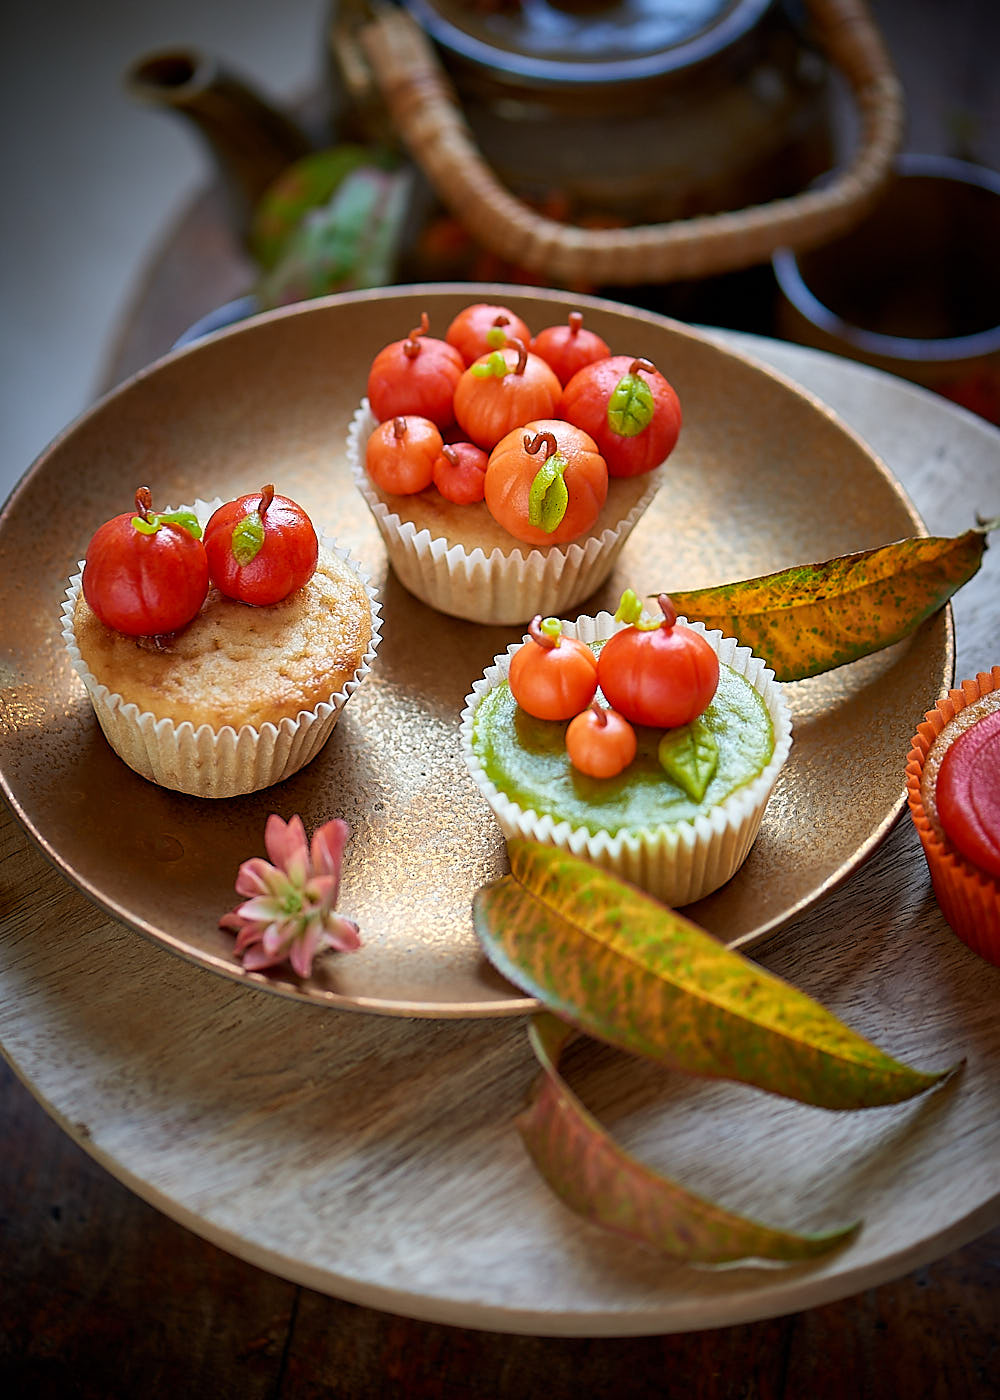 muffins cupcakes courges 1 Muffins courges en pâte d'amande